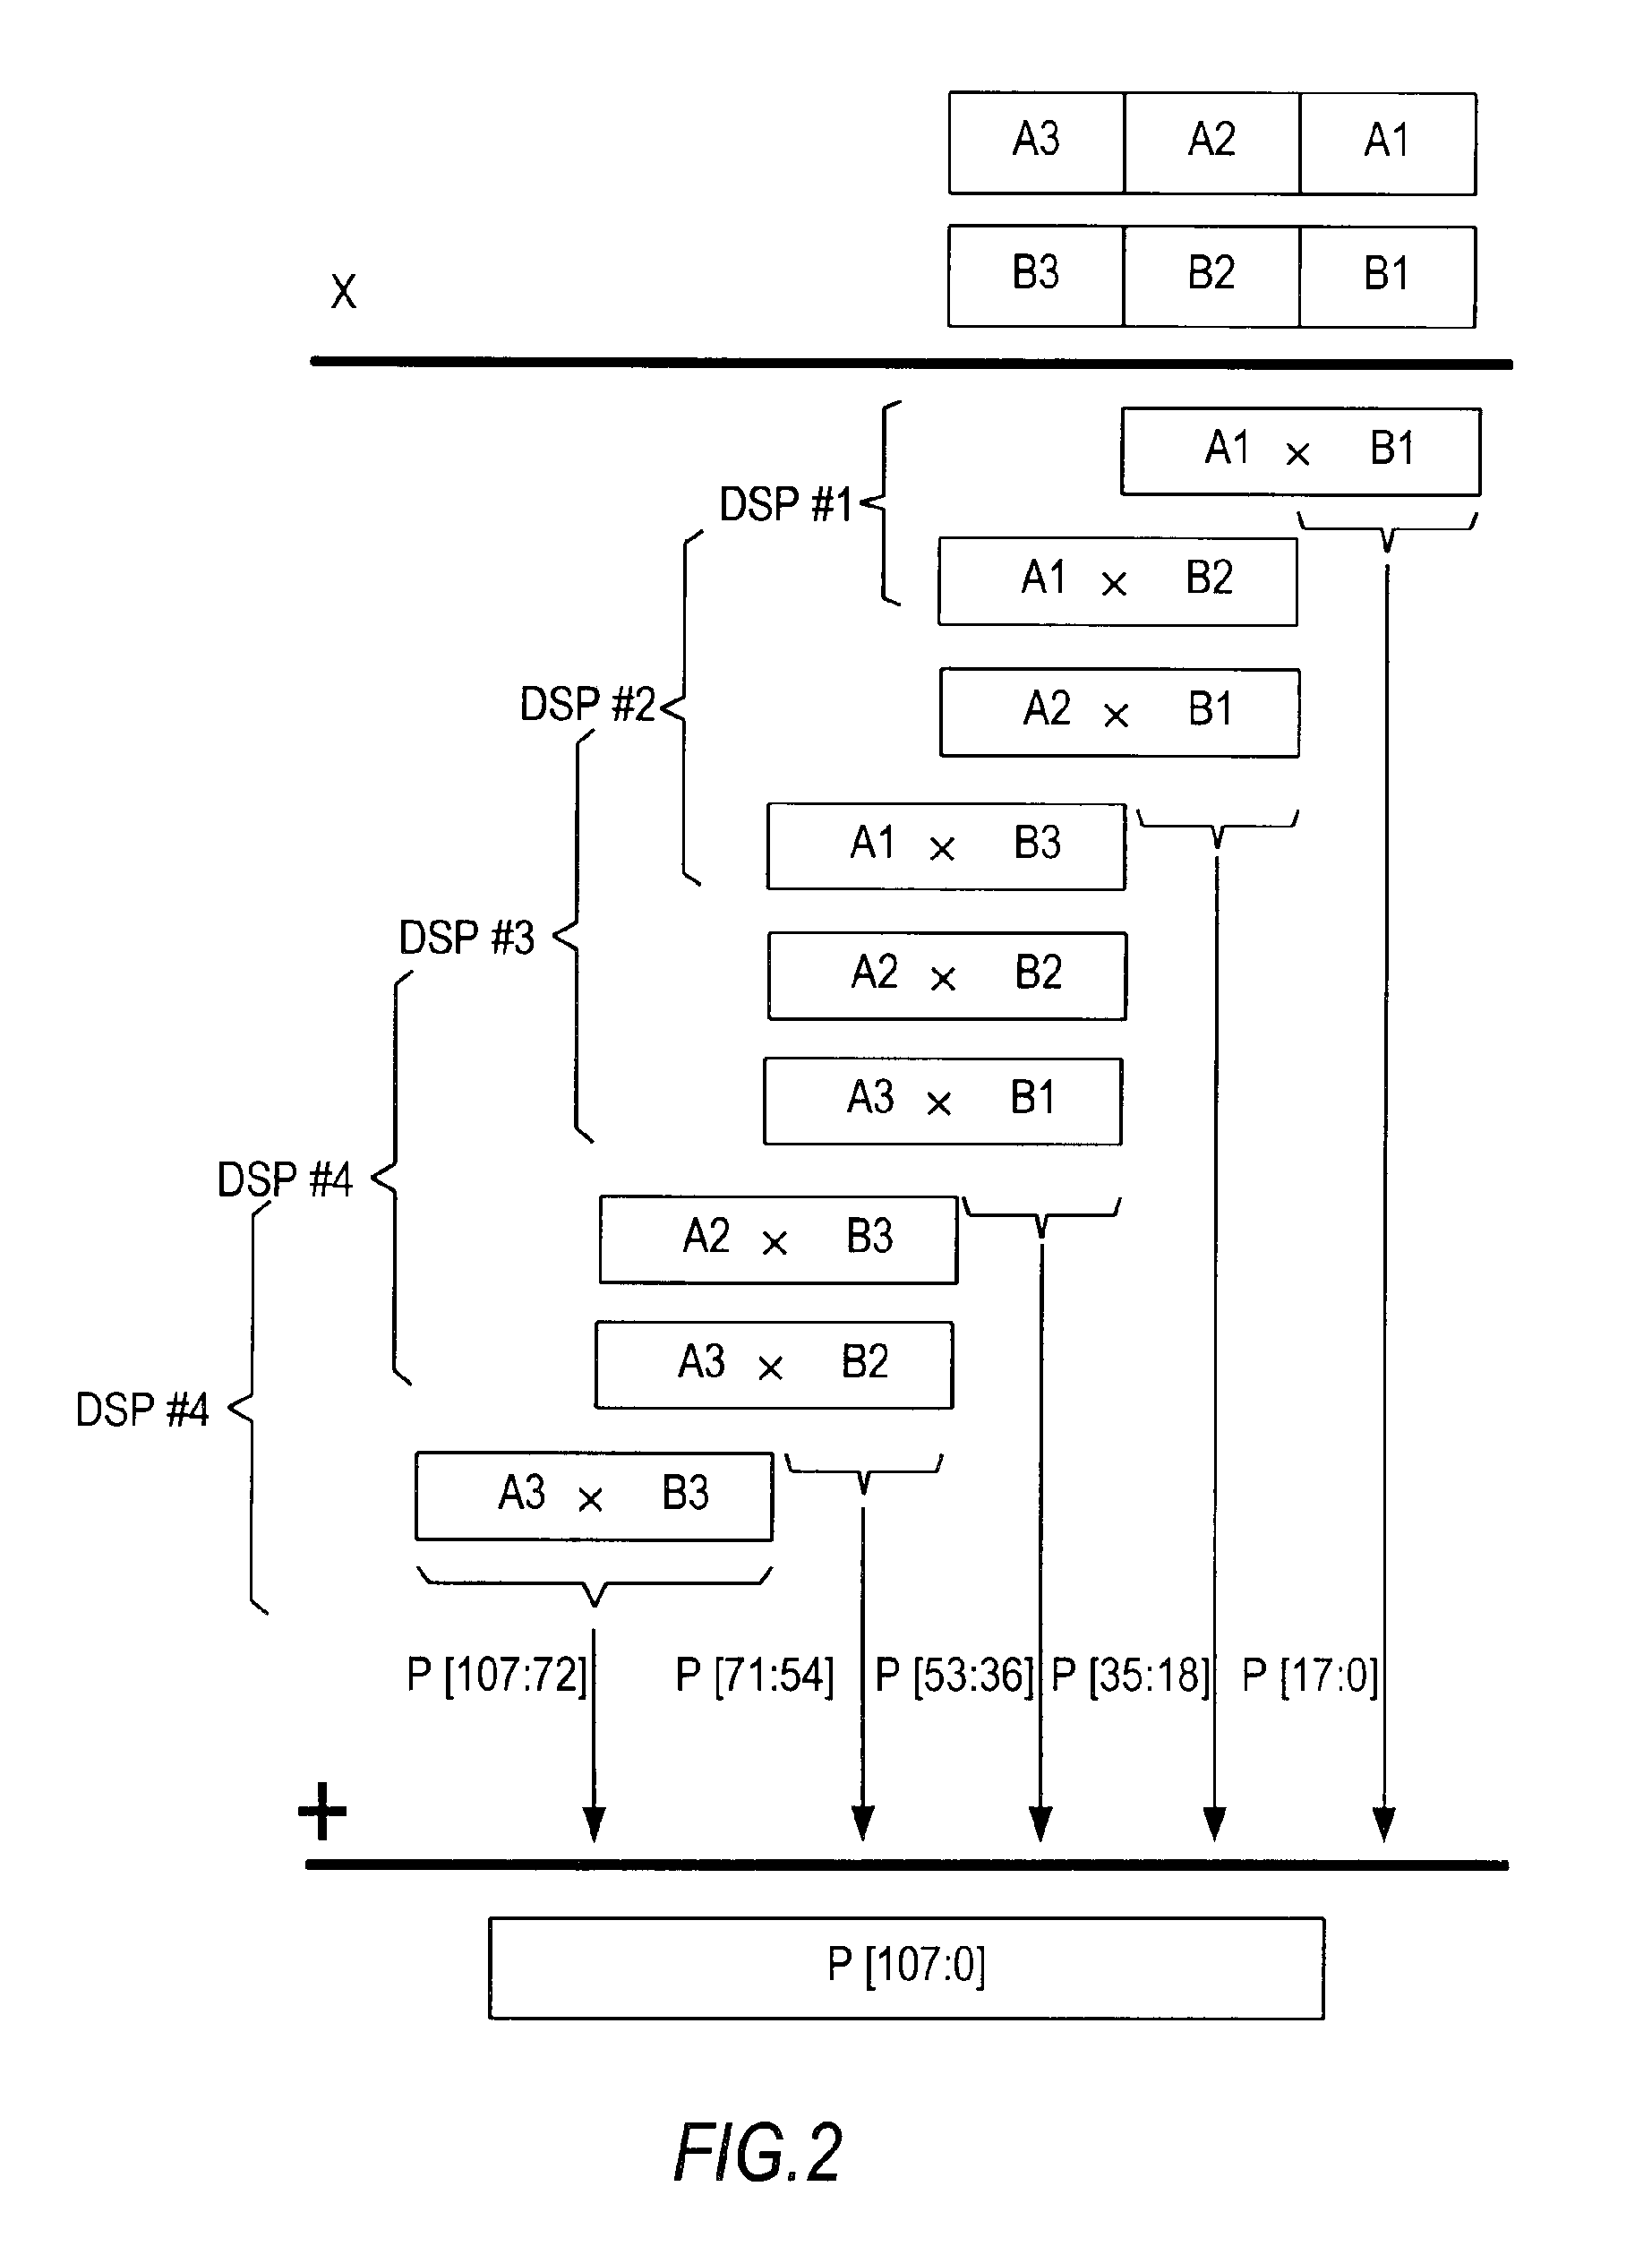 DSP block for implementing large multiplier on a programmable integrated circuit device